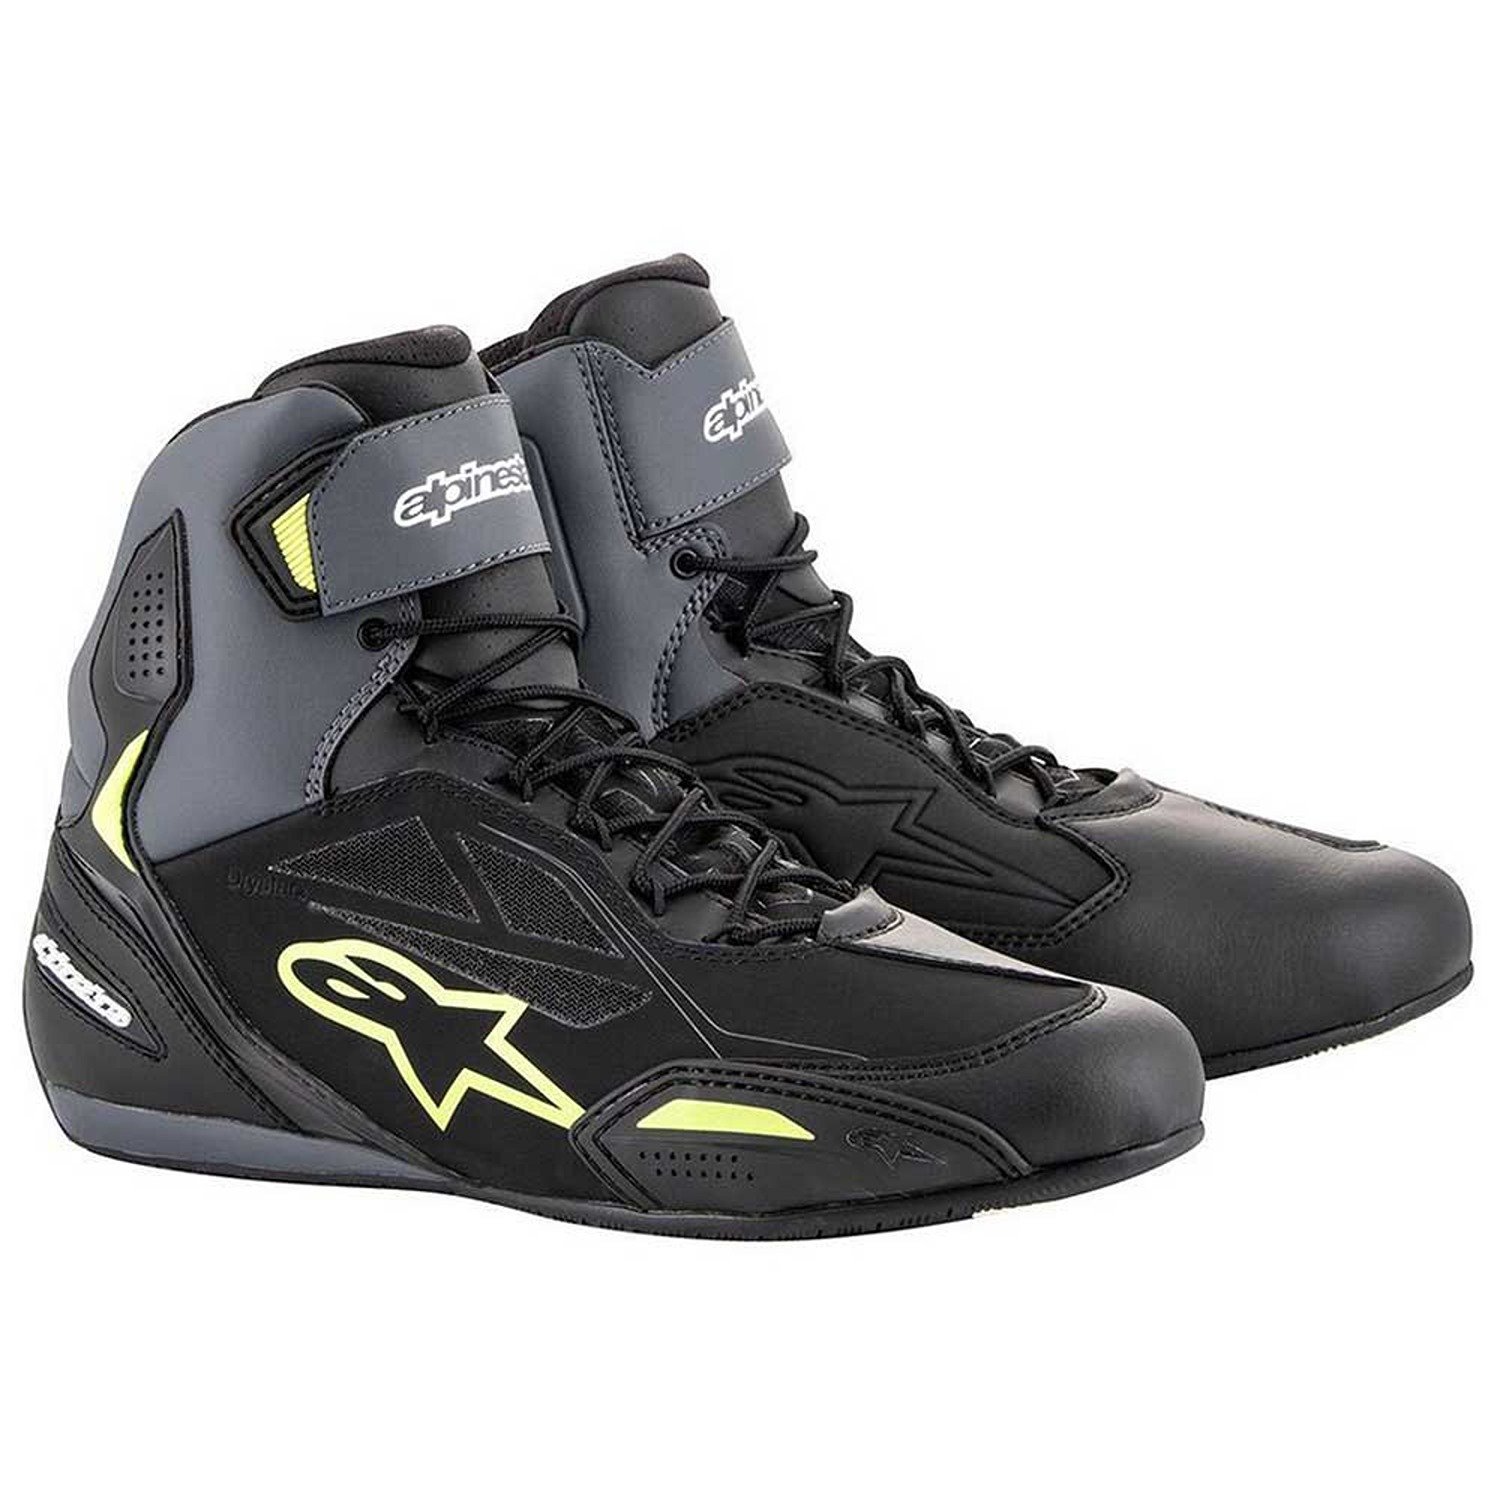 Image of Alpinestars Faster-3 Shoes Black Yellow Fluo Talla US 95